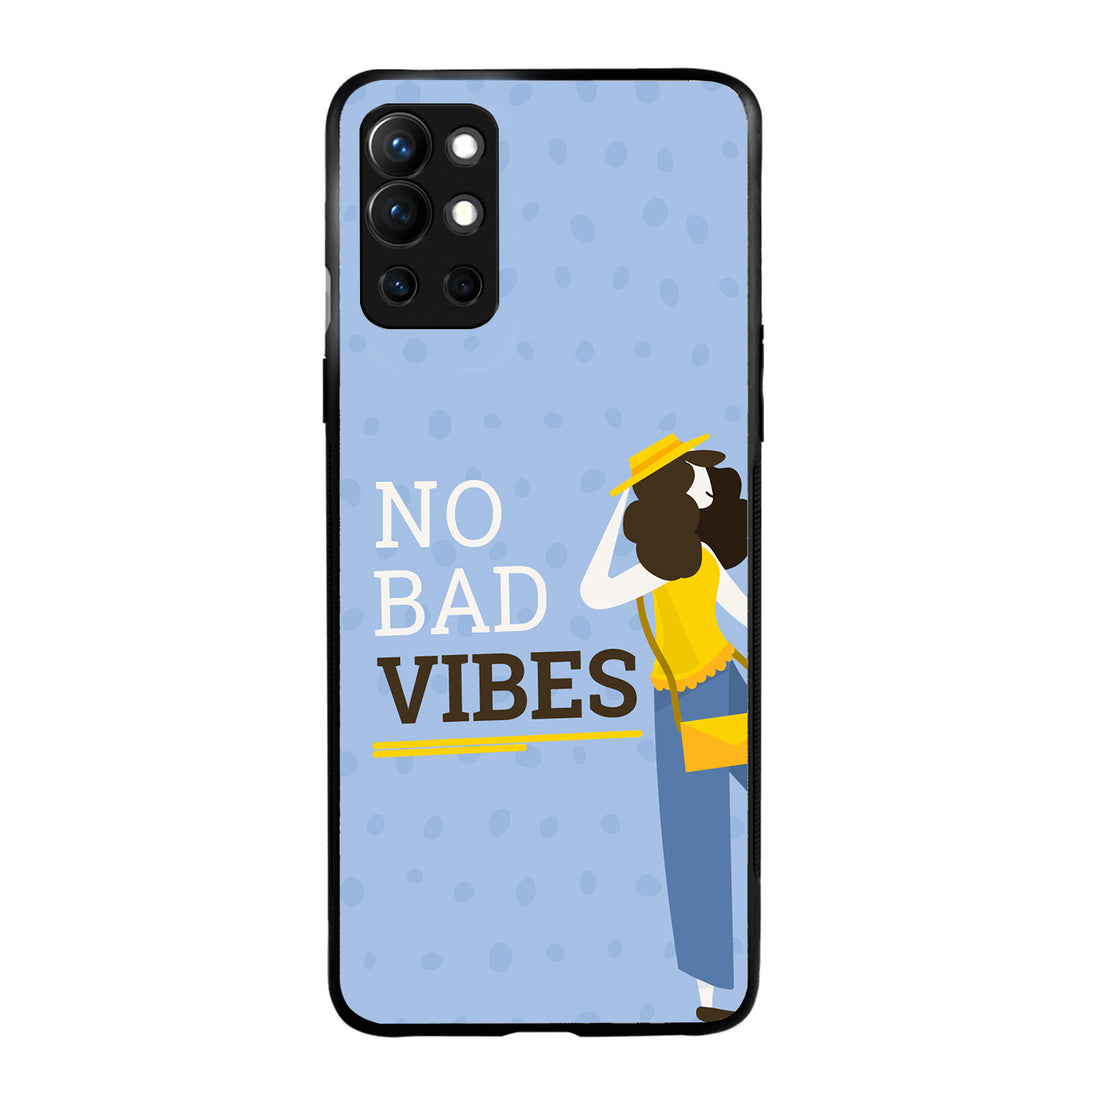 No Bad Vibes Motivational Quotes Oneplus 9 Pro Back Case